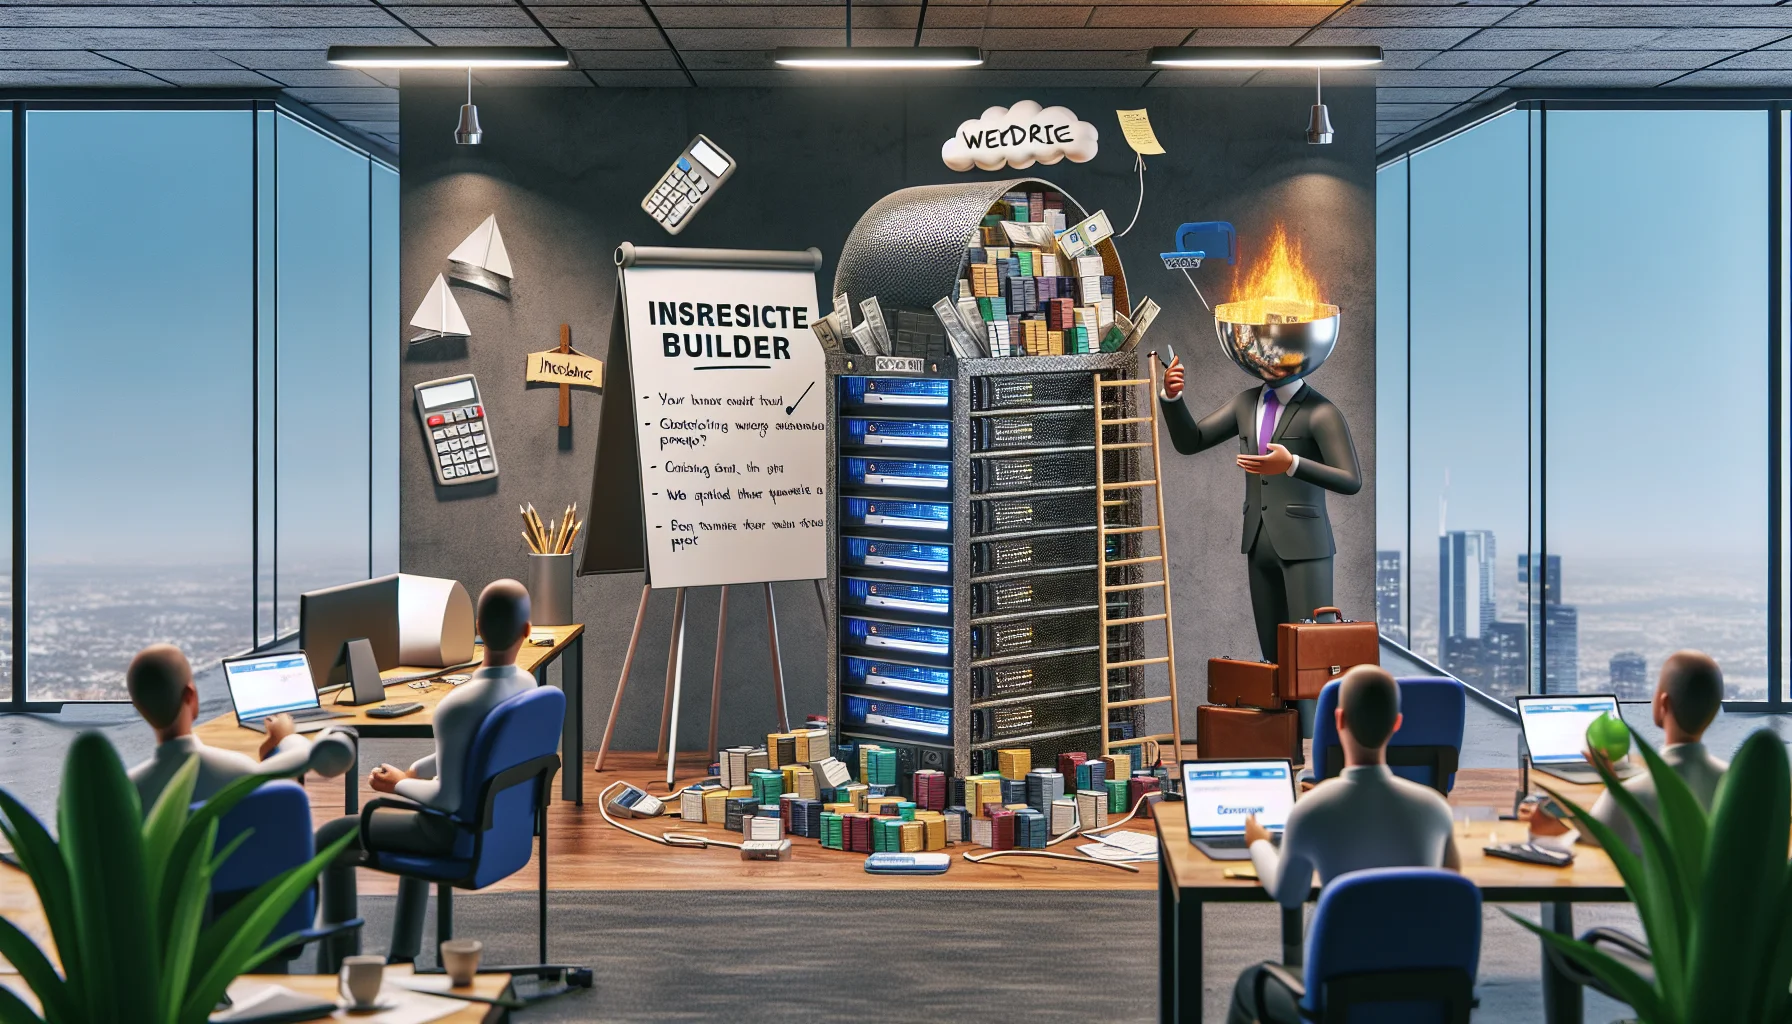 A humorous scenario unfolds in the world of website design. Inside a digitally illustrated office, an anthropomorphized version of an insurance website builder, characterized by a creative blend of classic insurance symbols such as shields, briefcases, and calculators, is trying to entice an equally cartoonish representation of a web hosting service, portrayed as a modern server rack with lights. The insurance builder has an engaging sales pitch written on a flipchart and is using comic tactics like juggling data packets and performing funny tricks to make the pitch more entertaining.